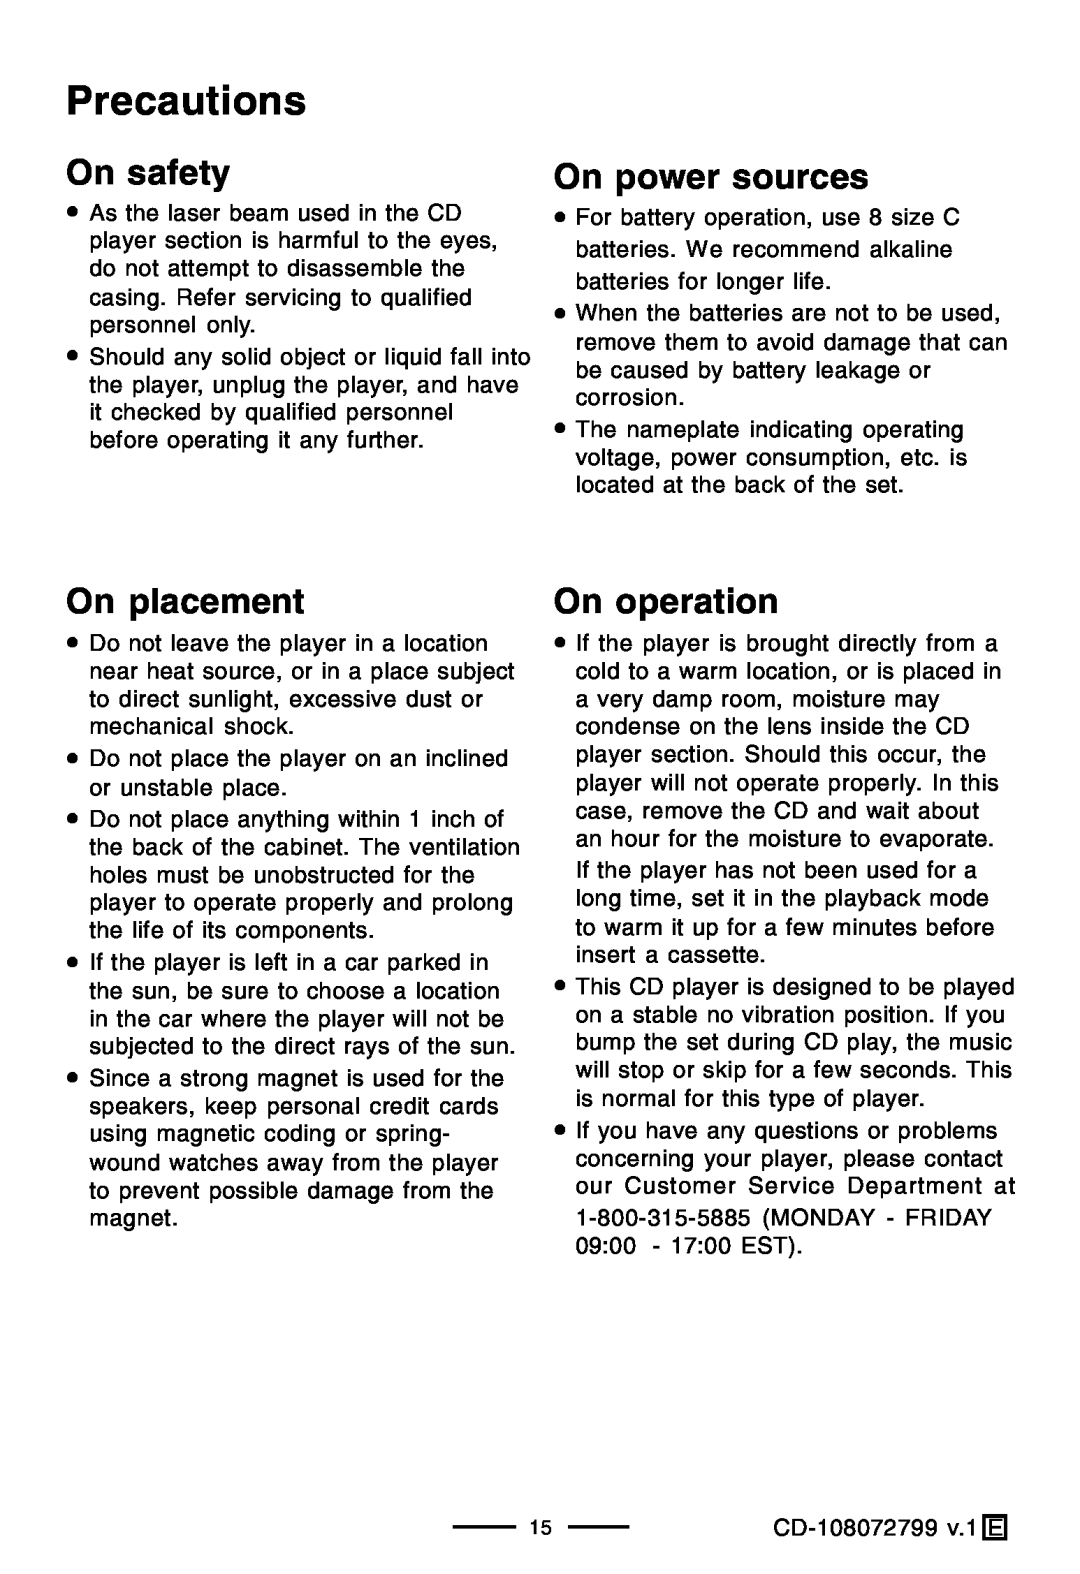 Lenoxx Electronics CD-108 operating instructions Precautions, On safety, On power sources, On placement, On operation 